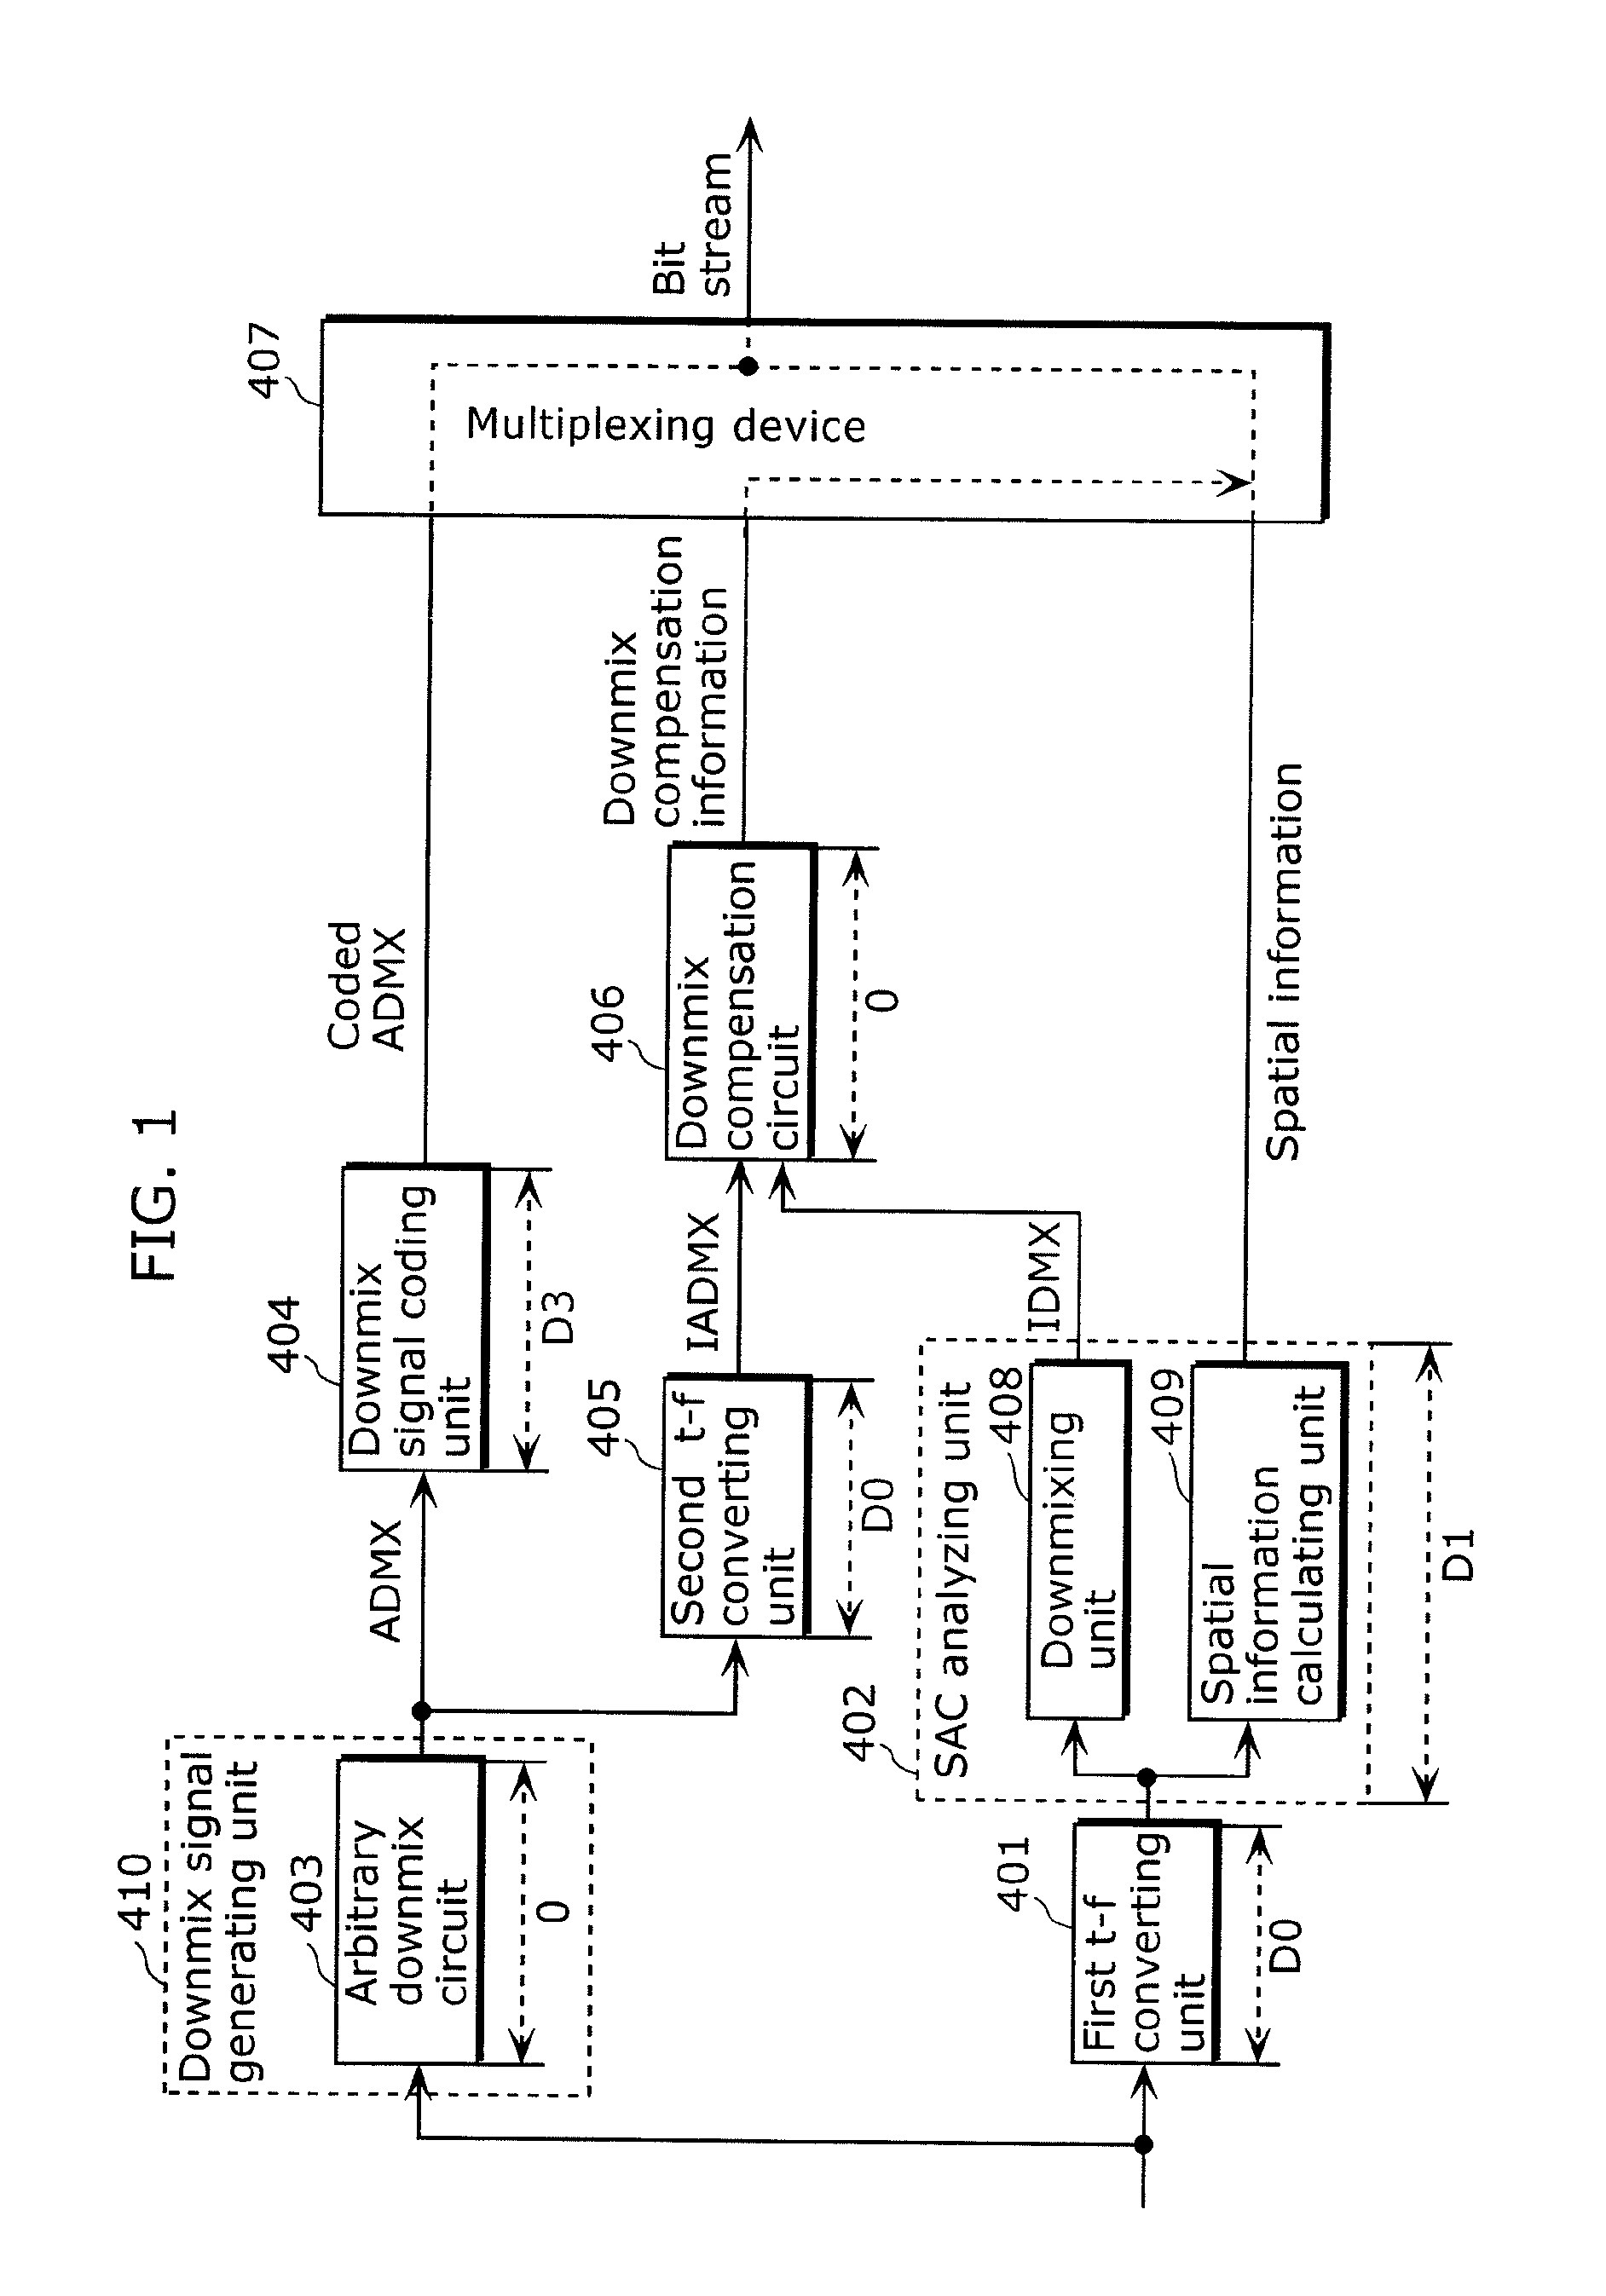 Reduced delay spatial coding and decoding apparatus and teleconferencing system